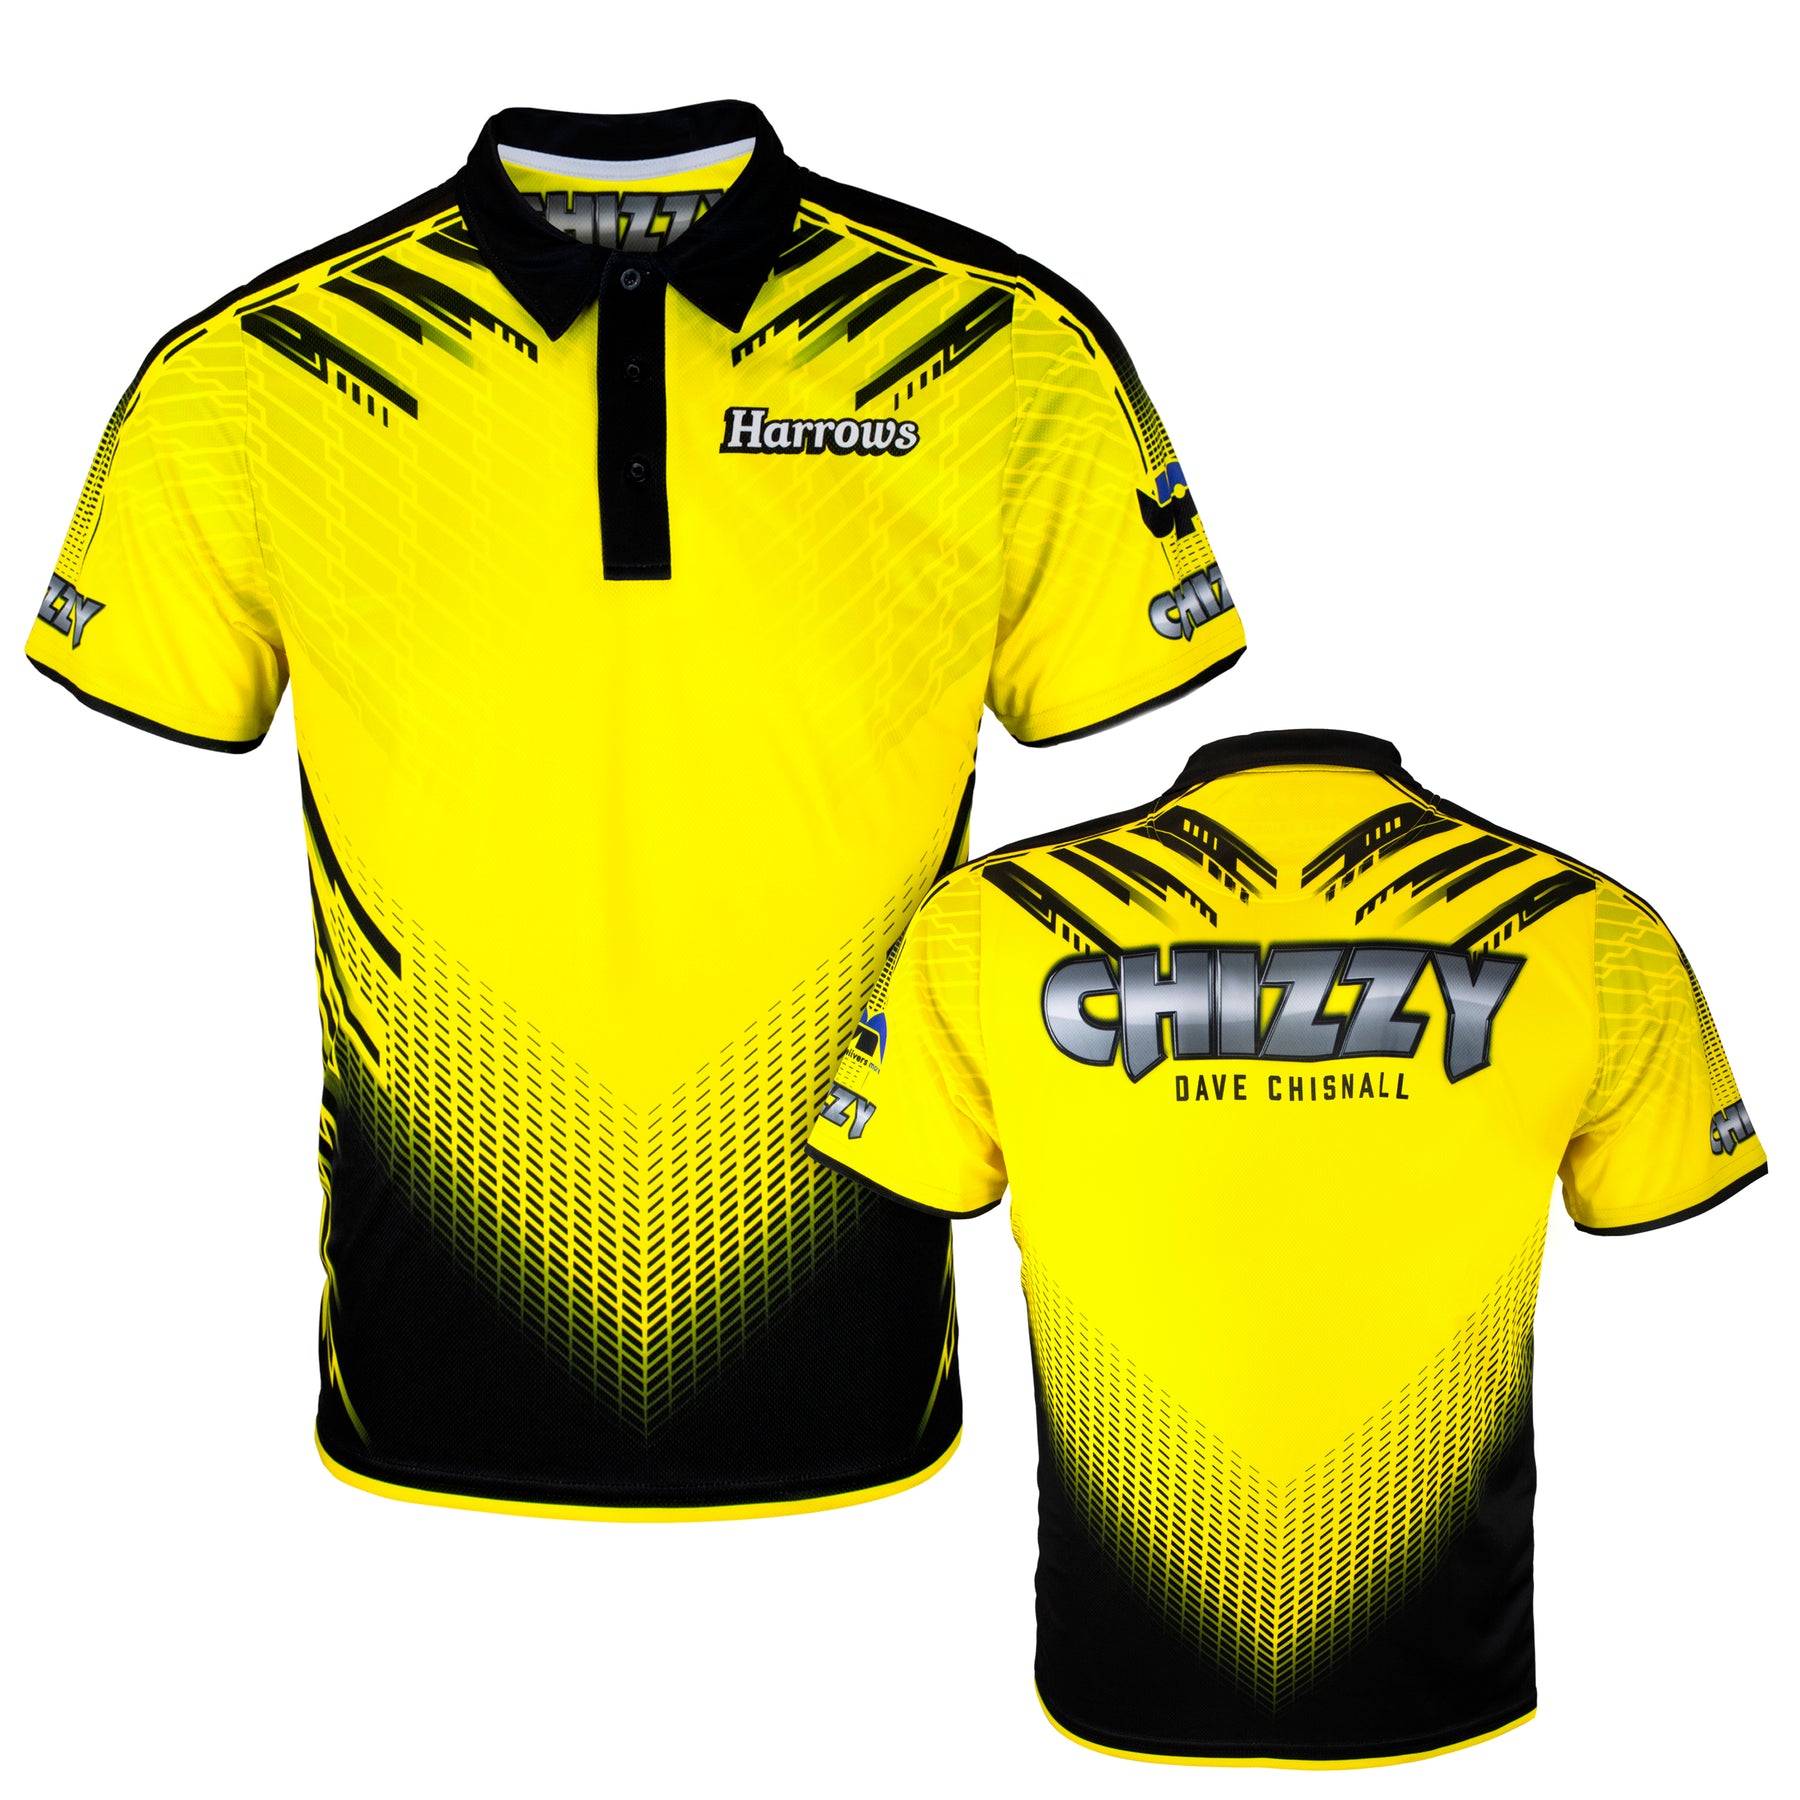 Dave 'Chizzy' Chisnall Shirt